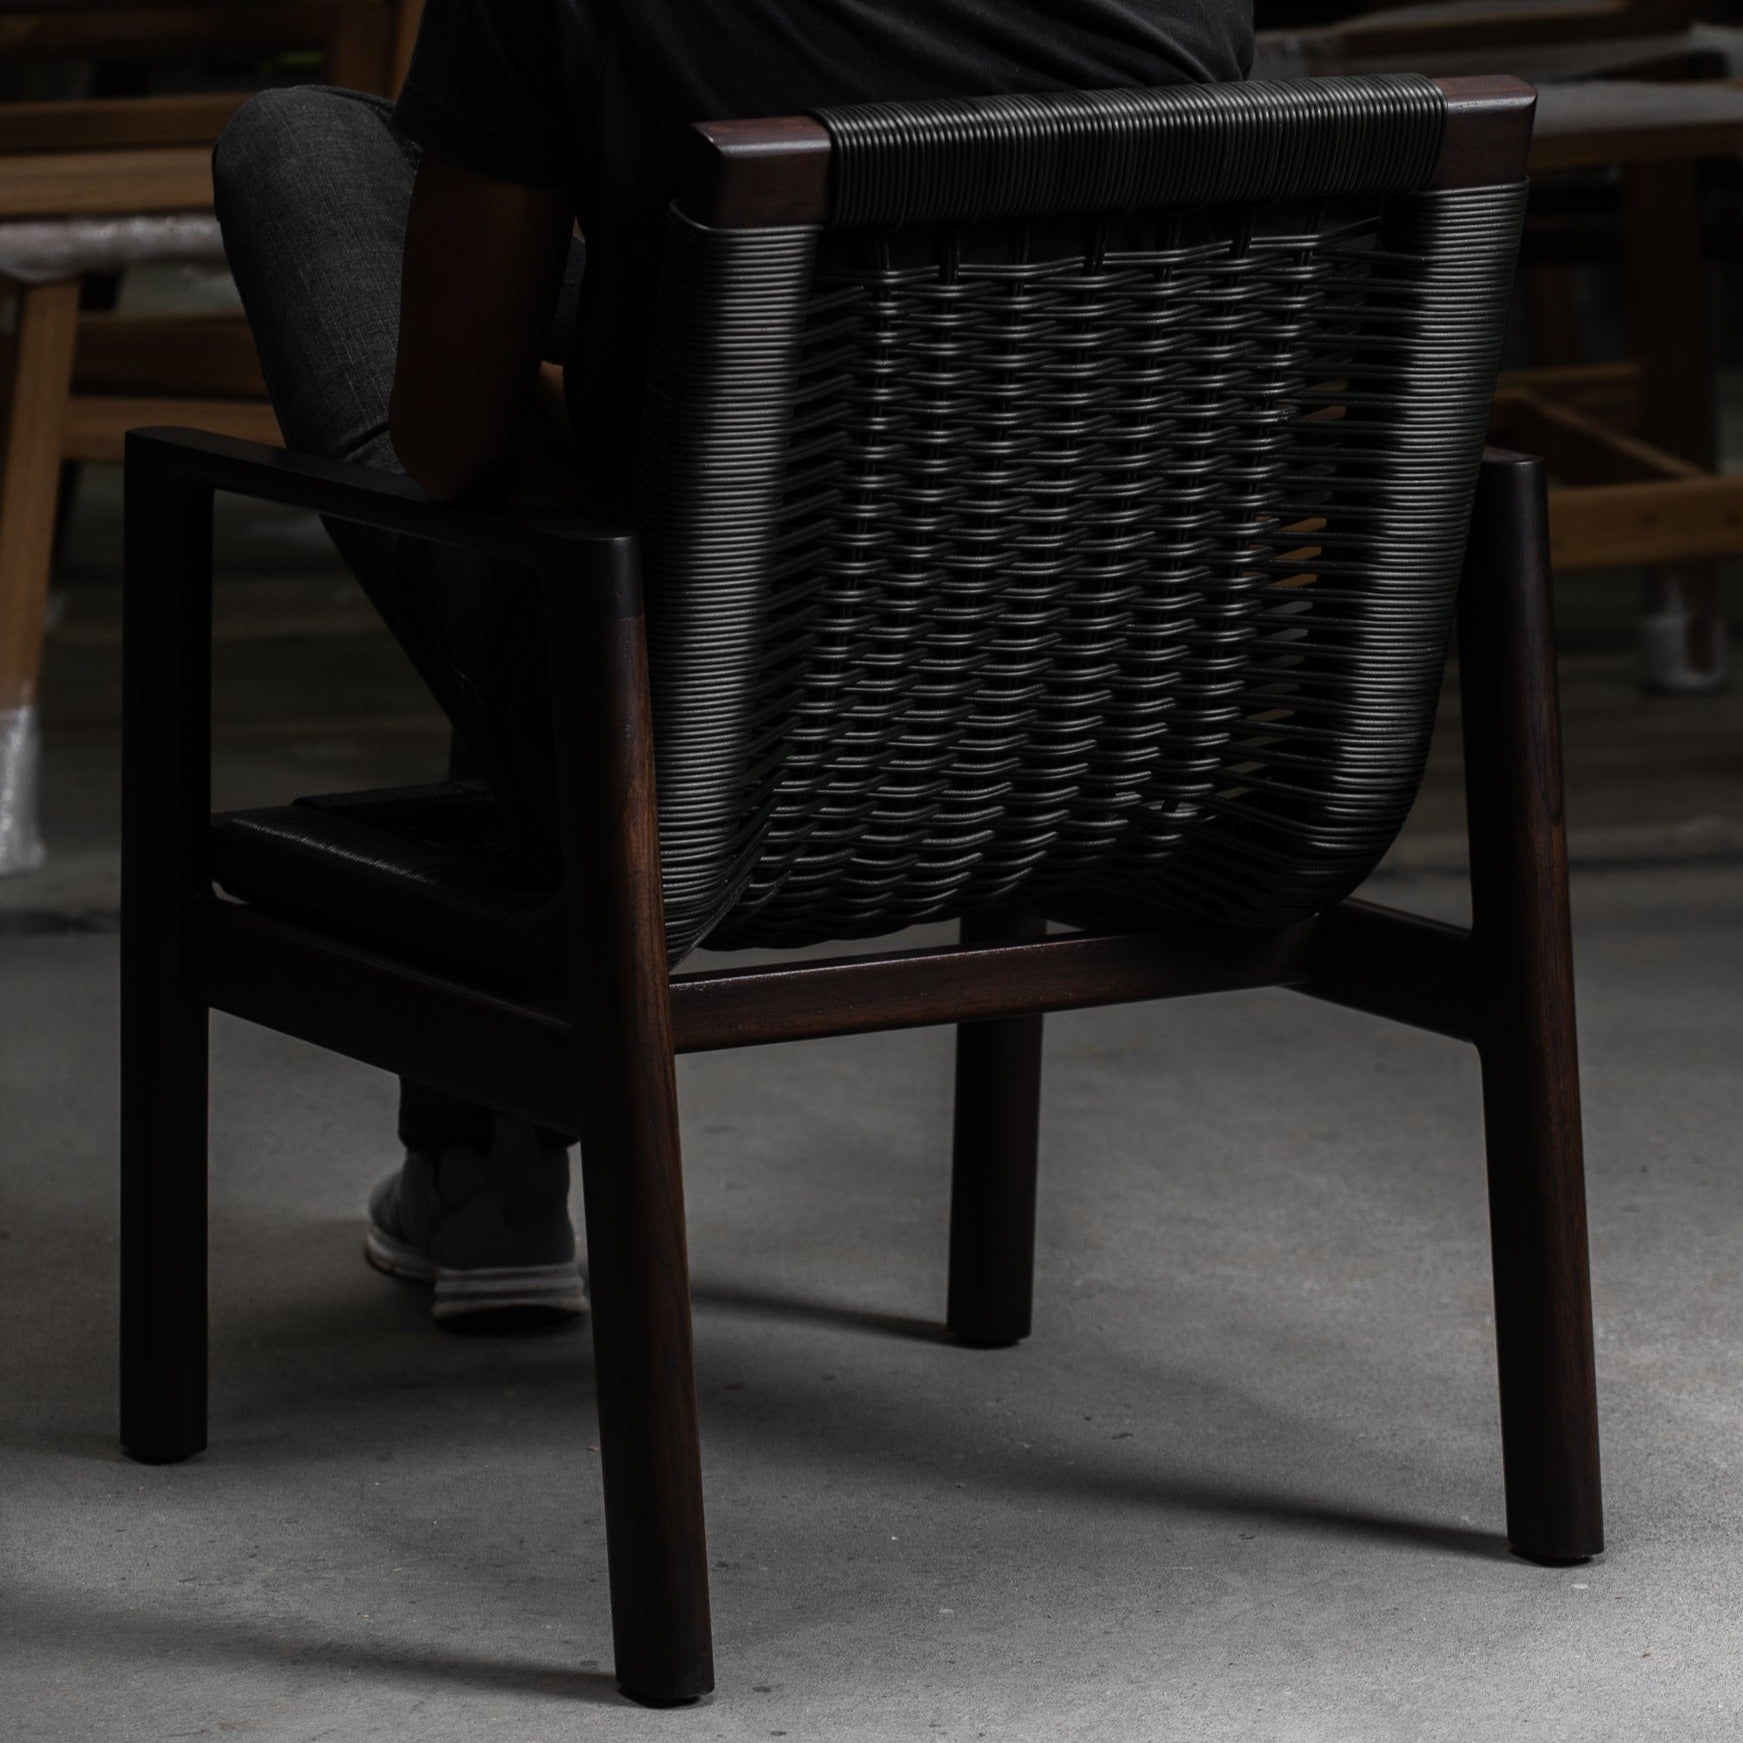 El Cairo Dining Chair